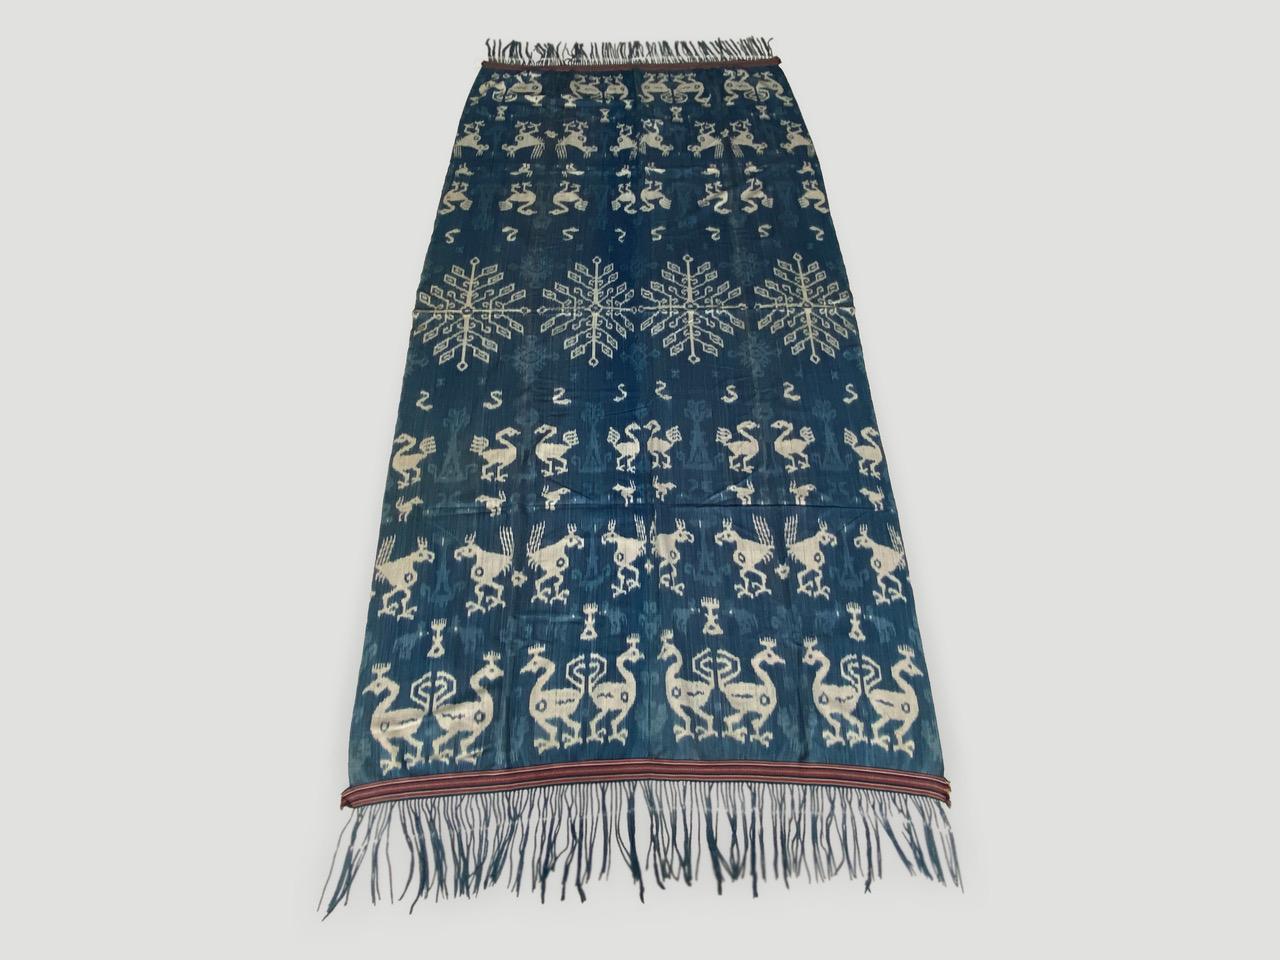 Beautiful soft Ikat, with stunning seven inch tassels, on this rare bold indigo and white textile from Sumba. Fabulous on a sofa, bed, a wall hanging, or even to wear as a shawl. Mythical characters, lizards, horses and birds intermingle in this